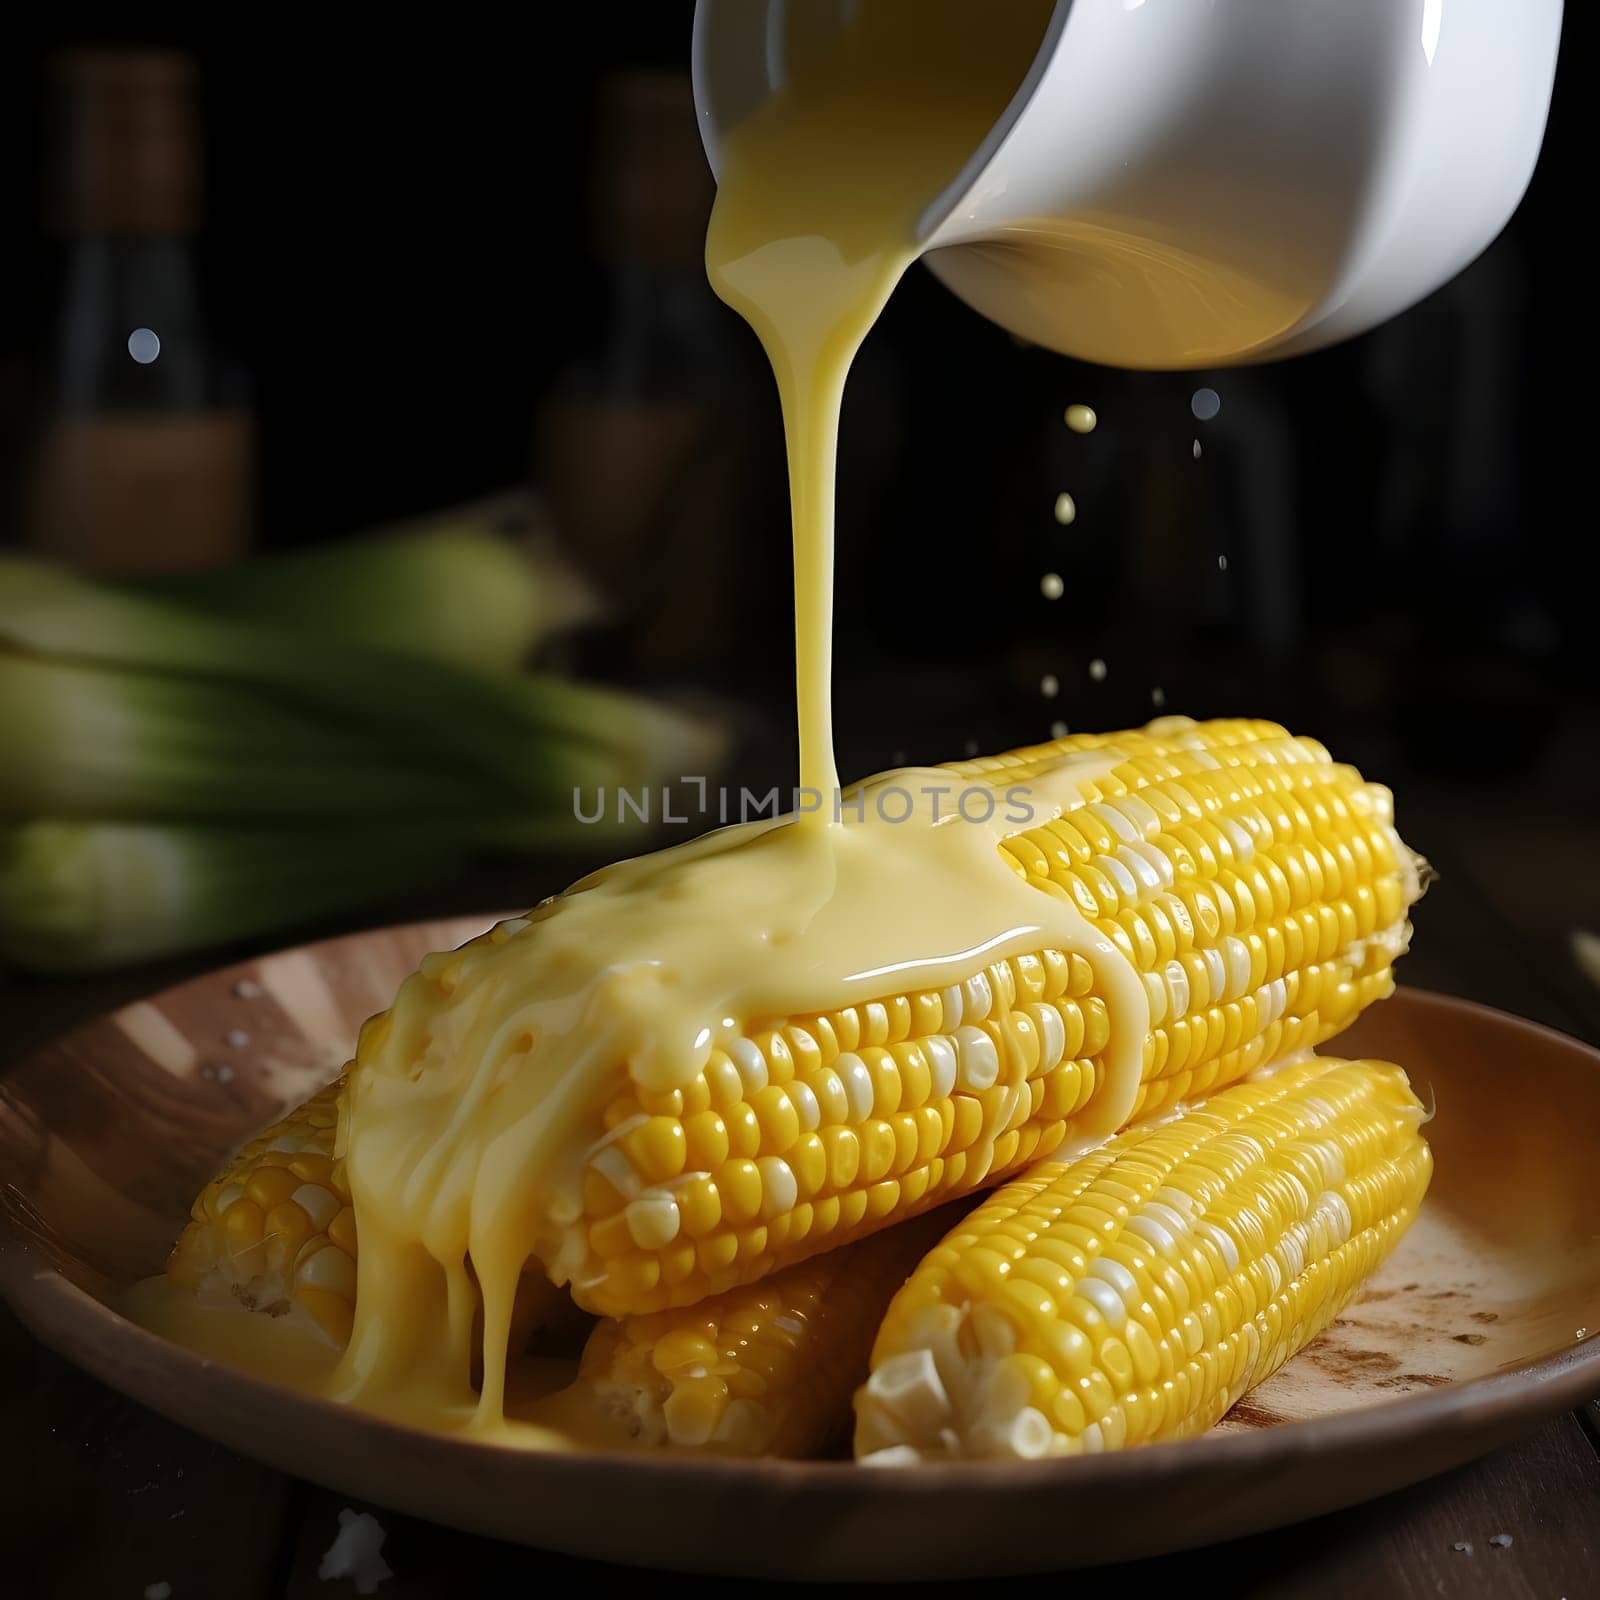 Four yellow corn cobs doused with corn sauce on a plate. Corn as a dish of thanksgiving for the harvest. An atmosphere of joy and celebration.